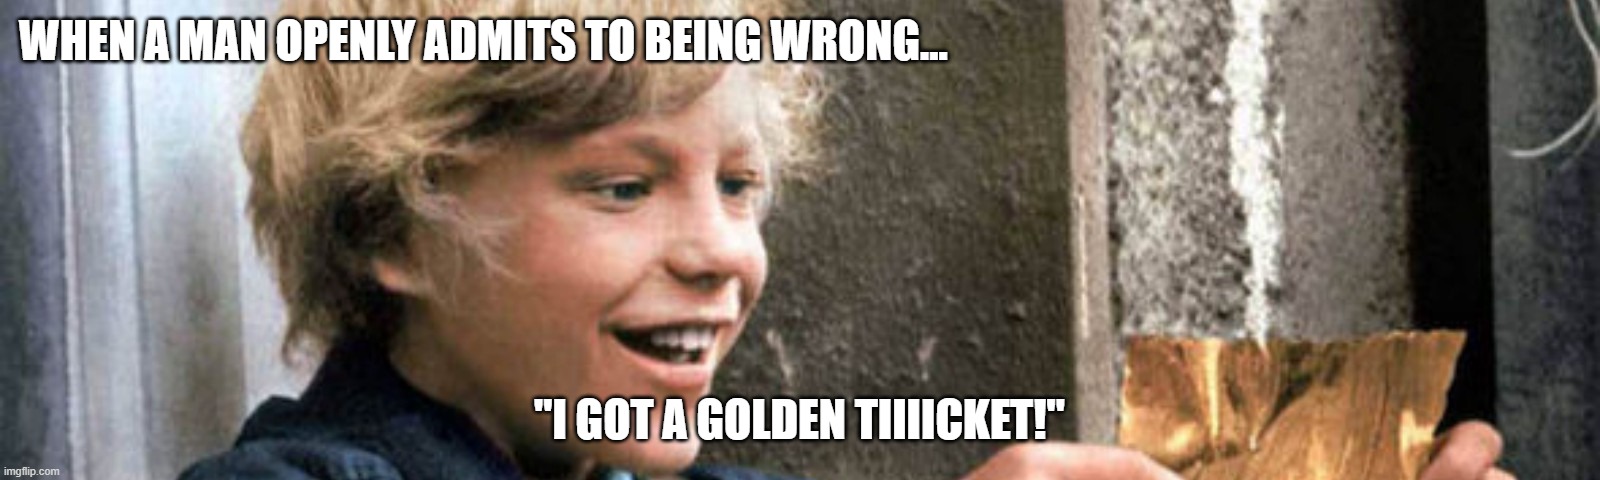 Golden ticket when men admit fault | WHEN A MAN OPENLY ADMITS TO BEING WRONG... "I GOT A GOLDEN TIIIICKET!" | image tagged in mendrool,men vs women | made w/ Imgflip meme maker